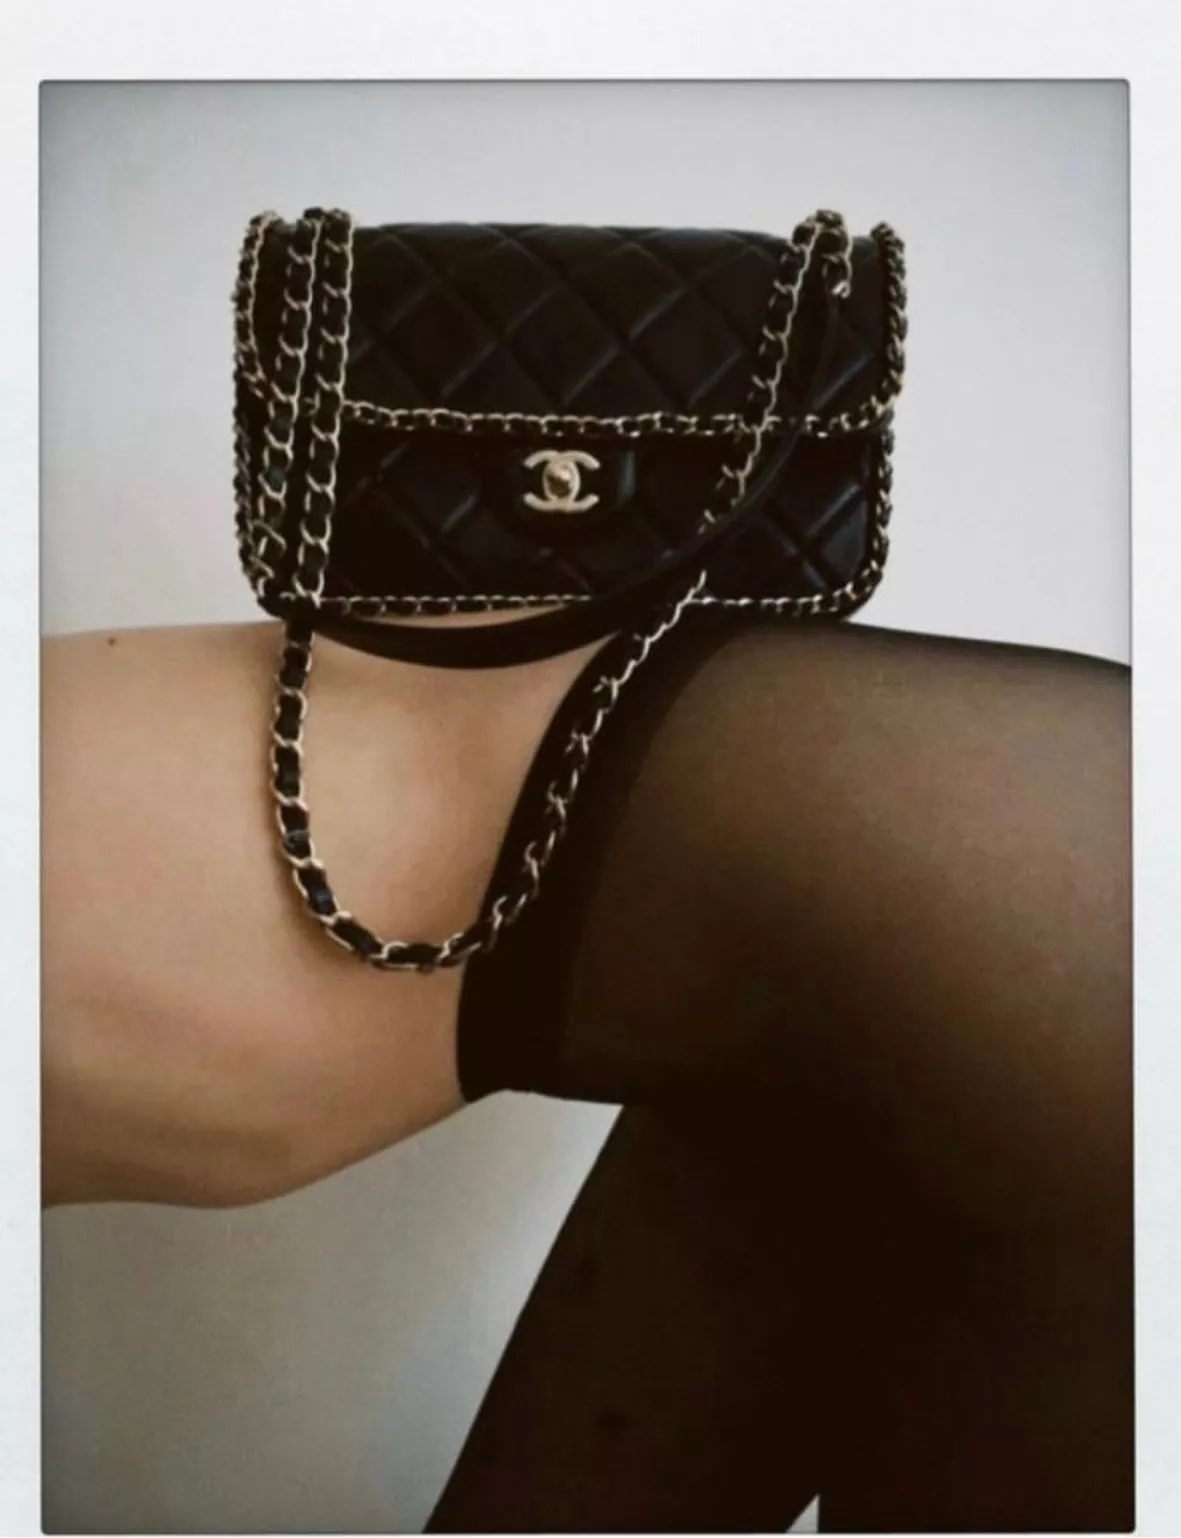 how much is the chanel jumbo flap bag